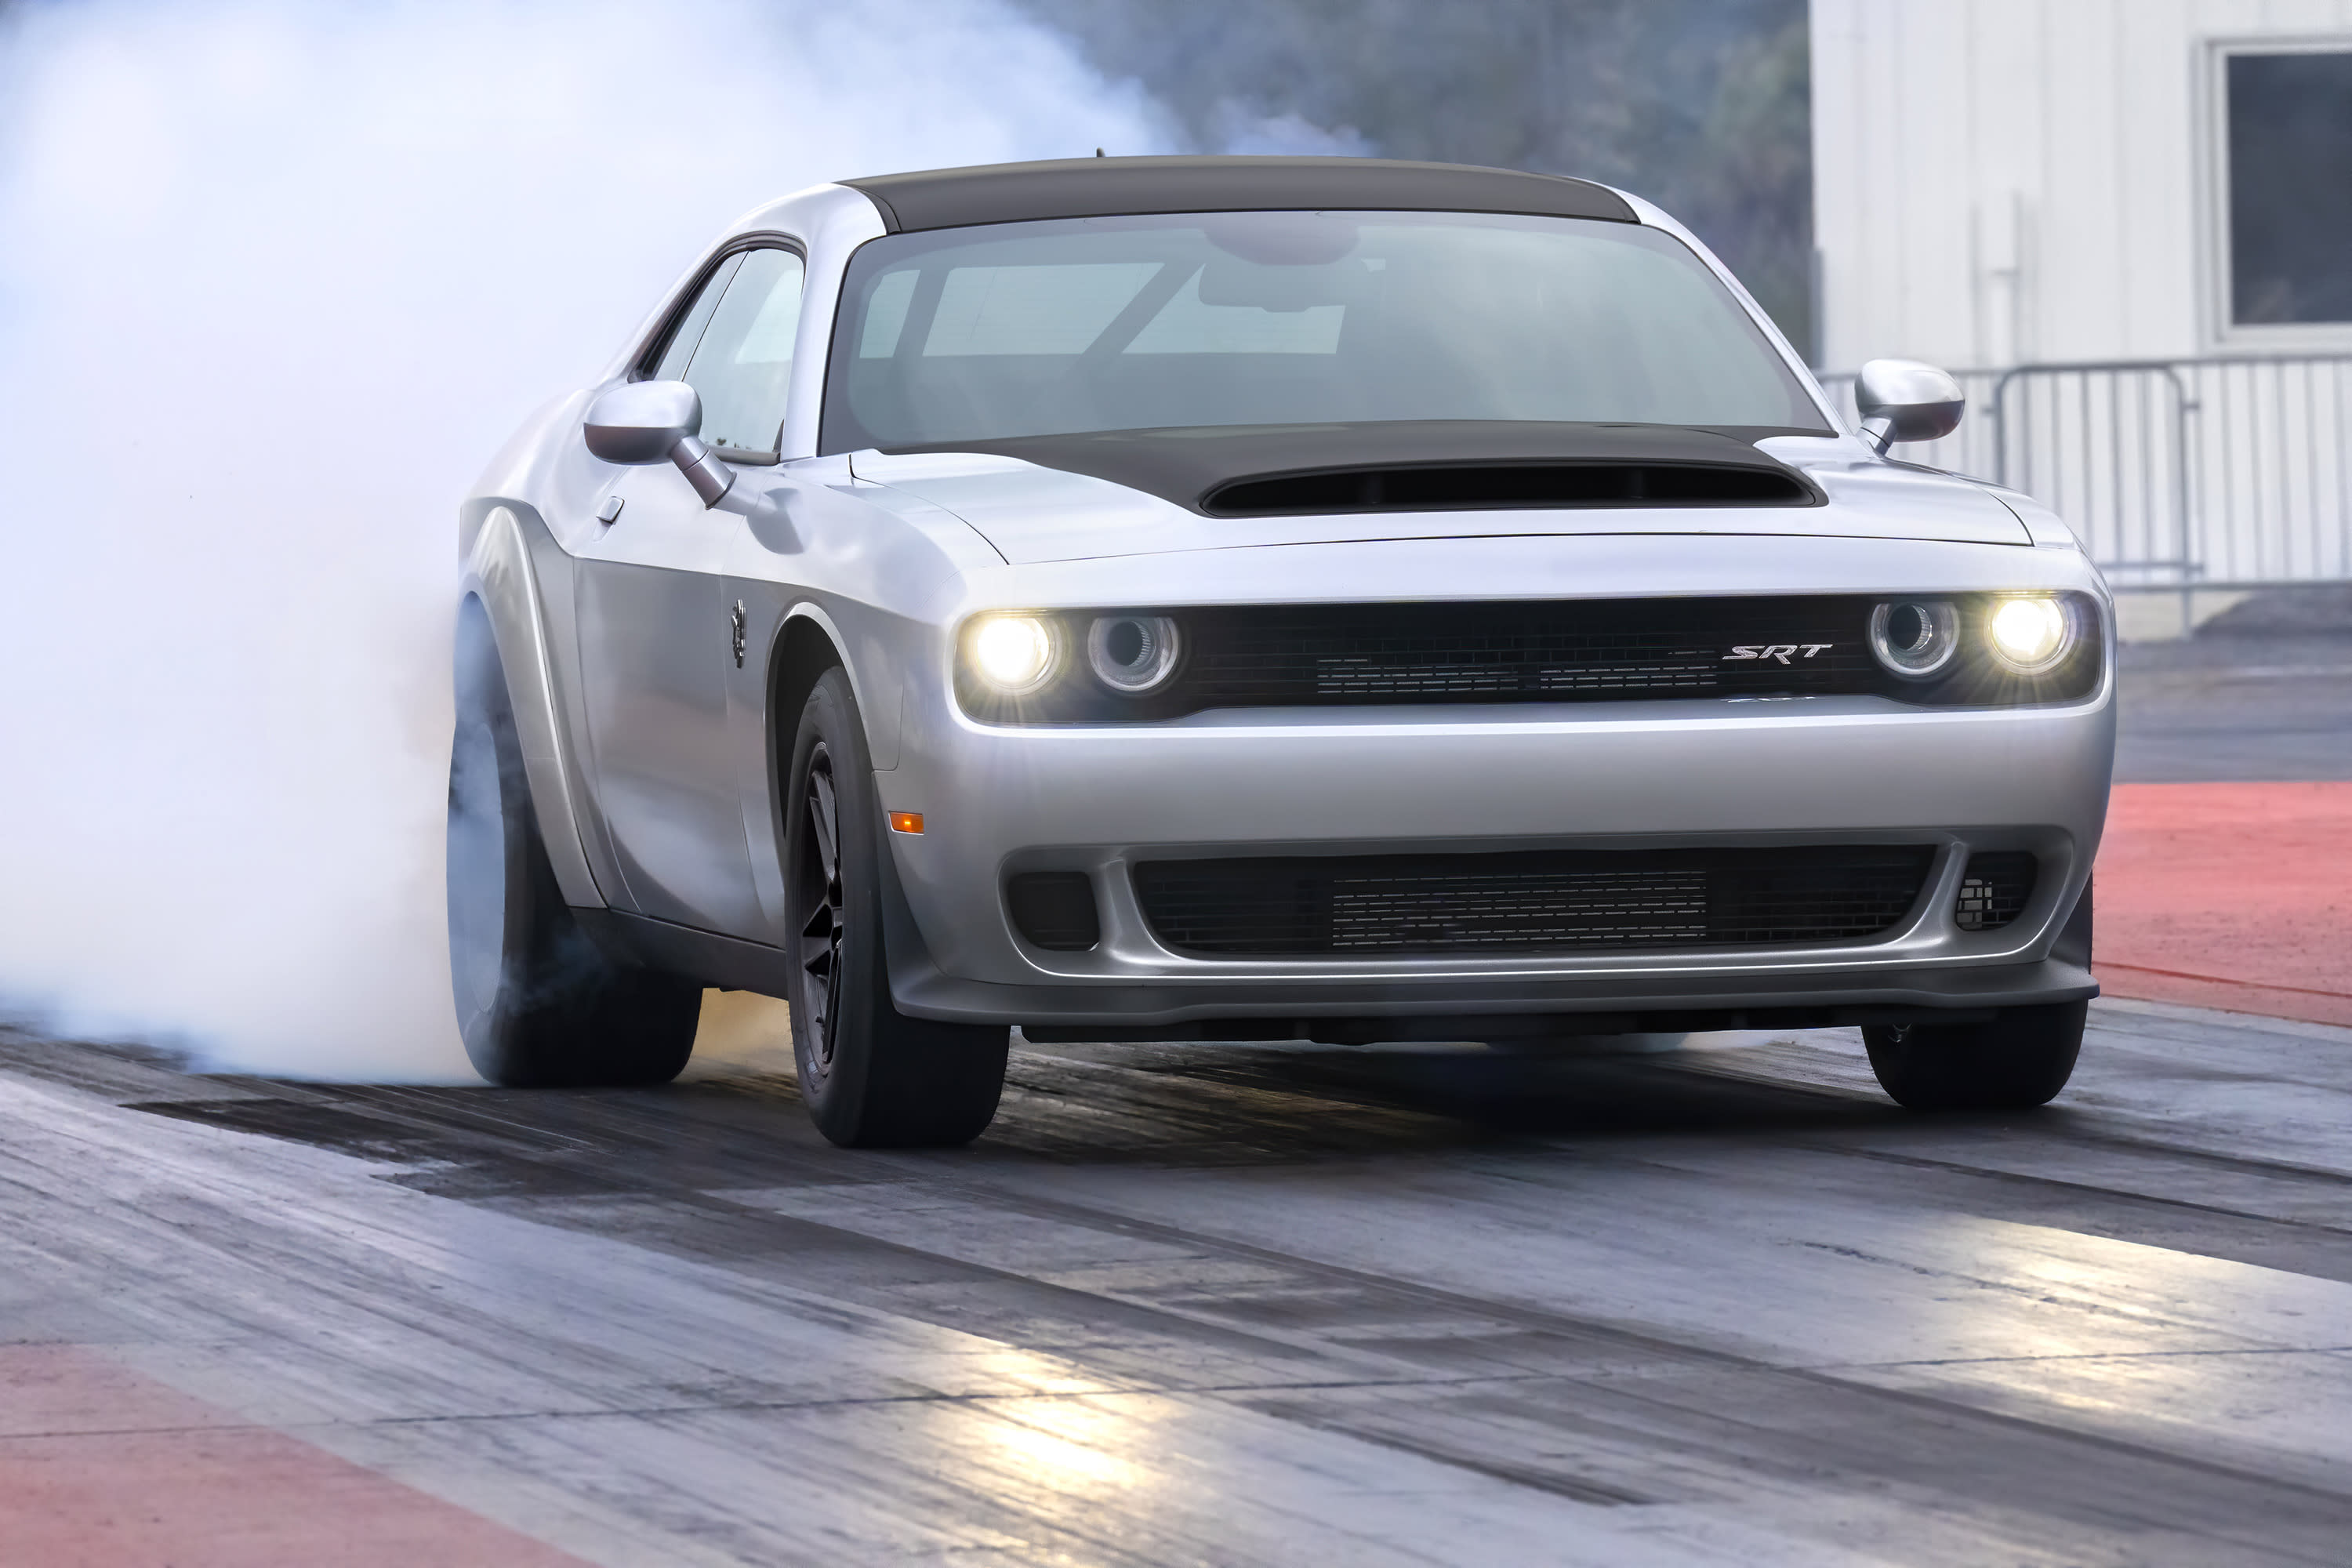 The Dodge Challenger SRT Demon was resurrected for the final year of muscle cars